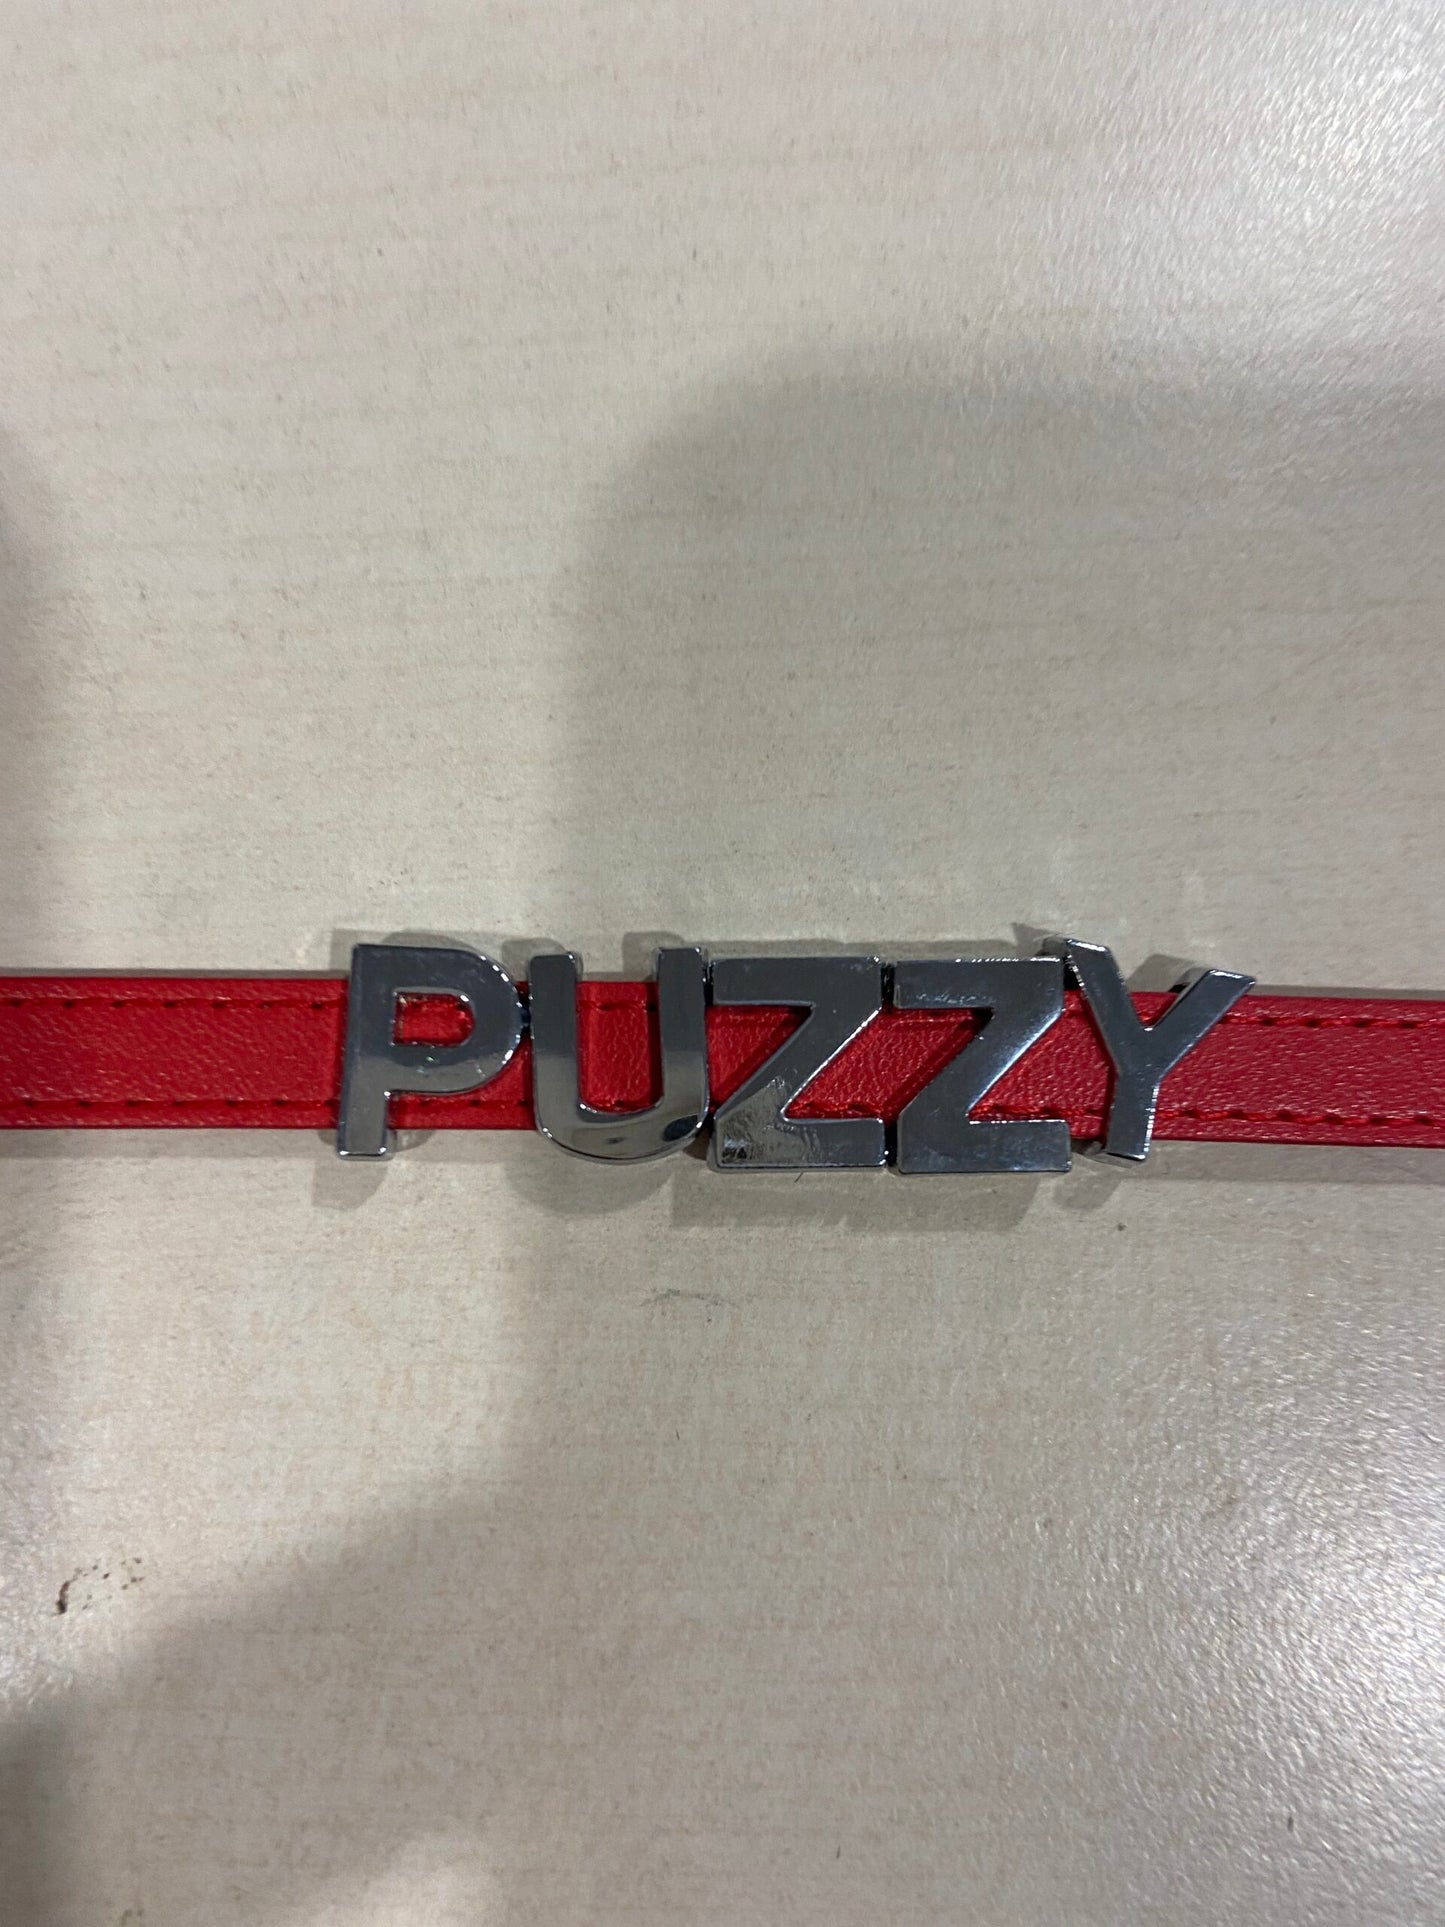 Luxury Collar Red with Name PUZZY - BDSM - Heavy Quality